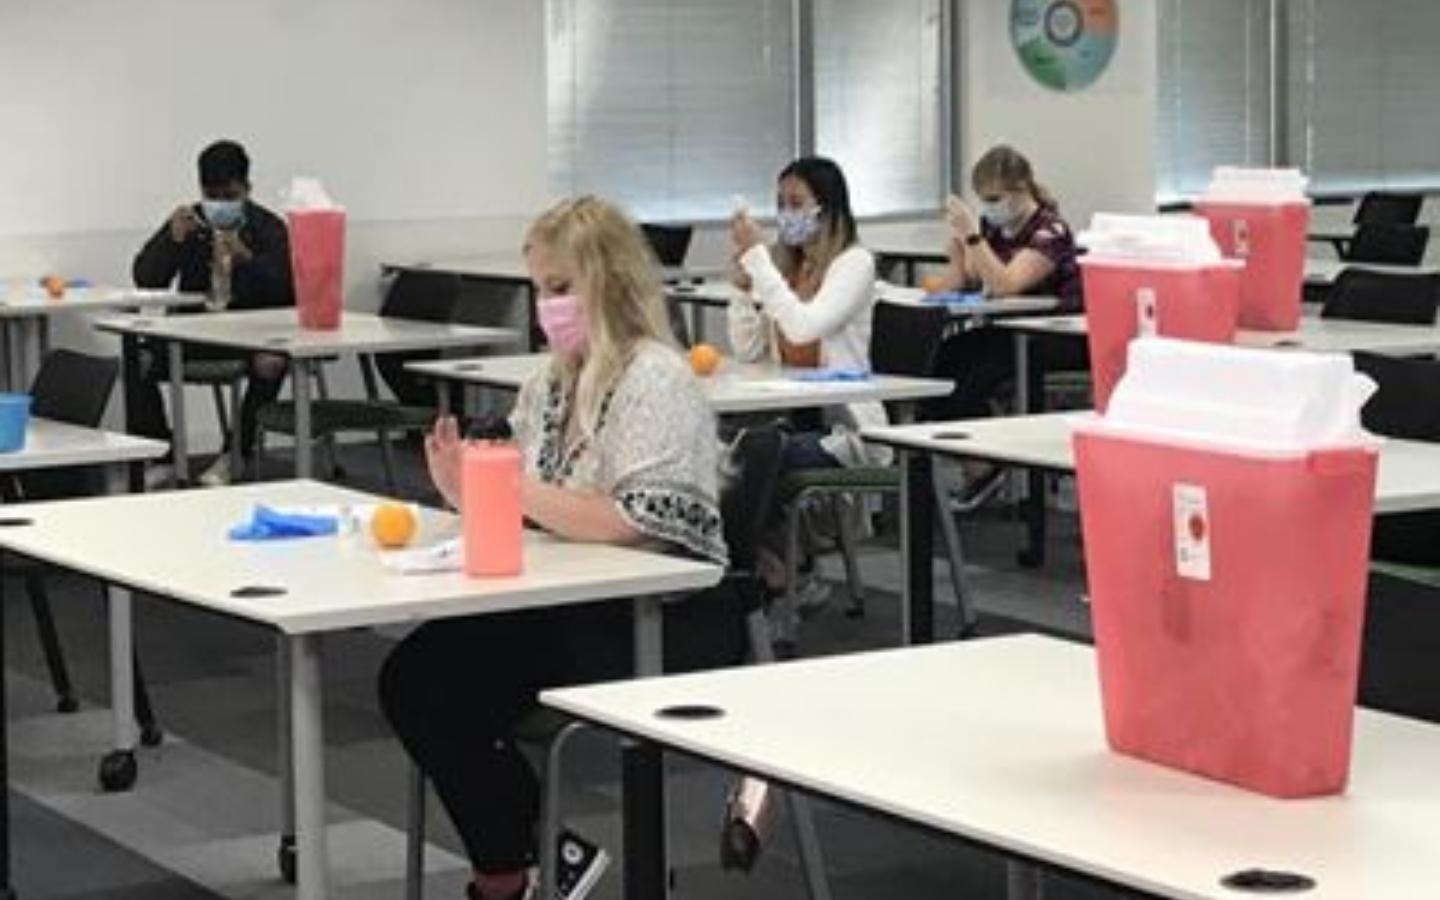 Students socially distanced with masks participating in labs